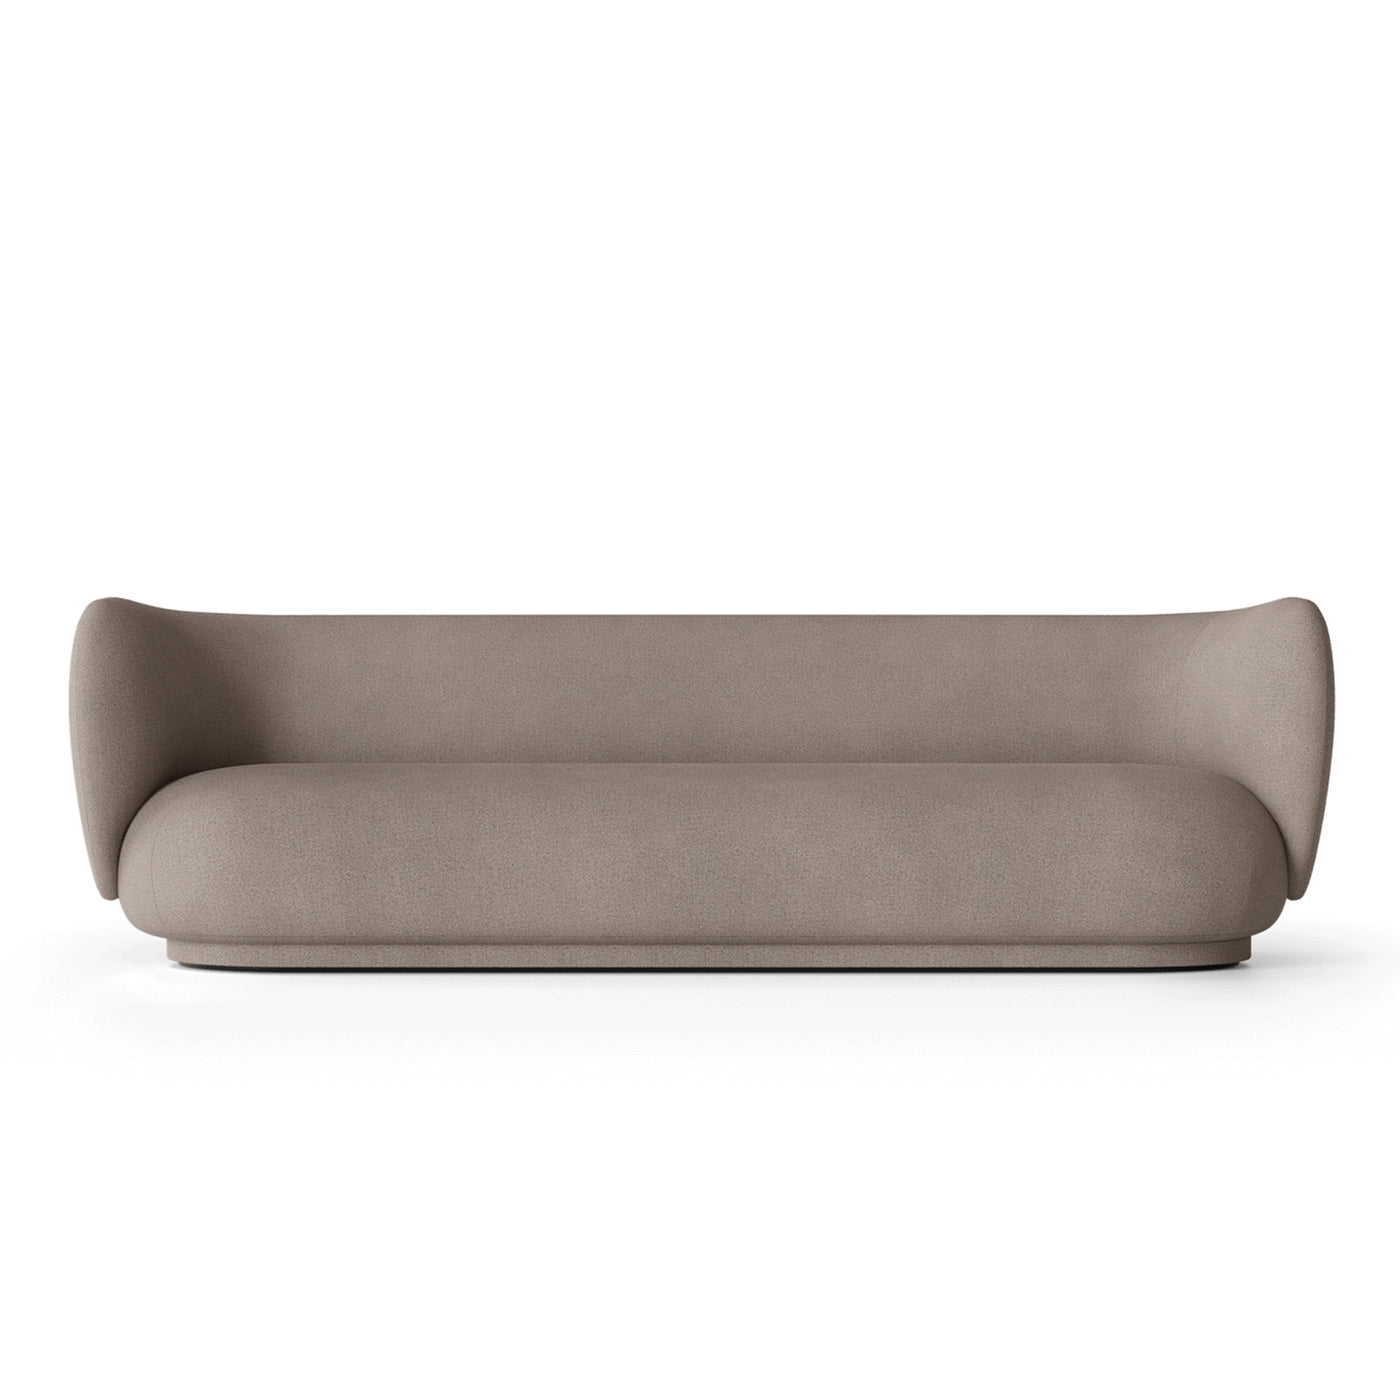 ferm LIVING Rico 4 seater sofa. Made to order from someday designs. #colour_grey-soft